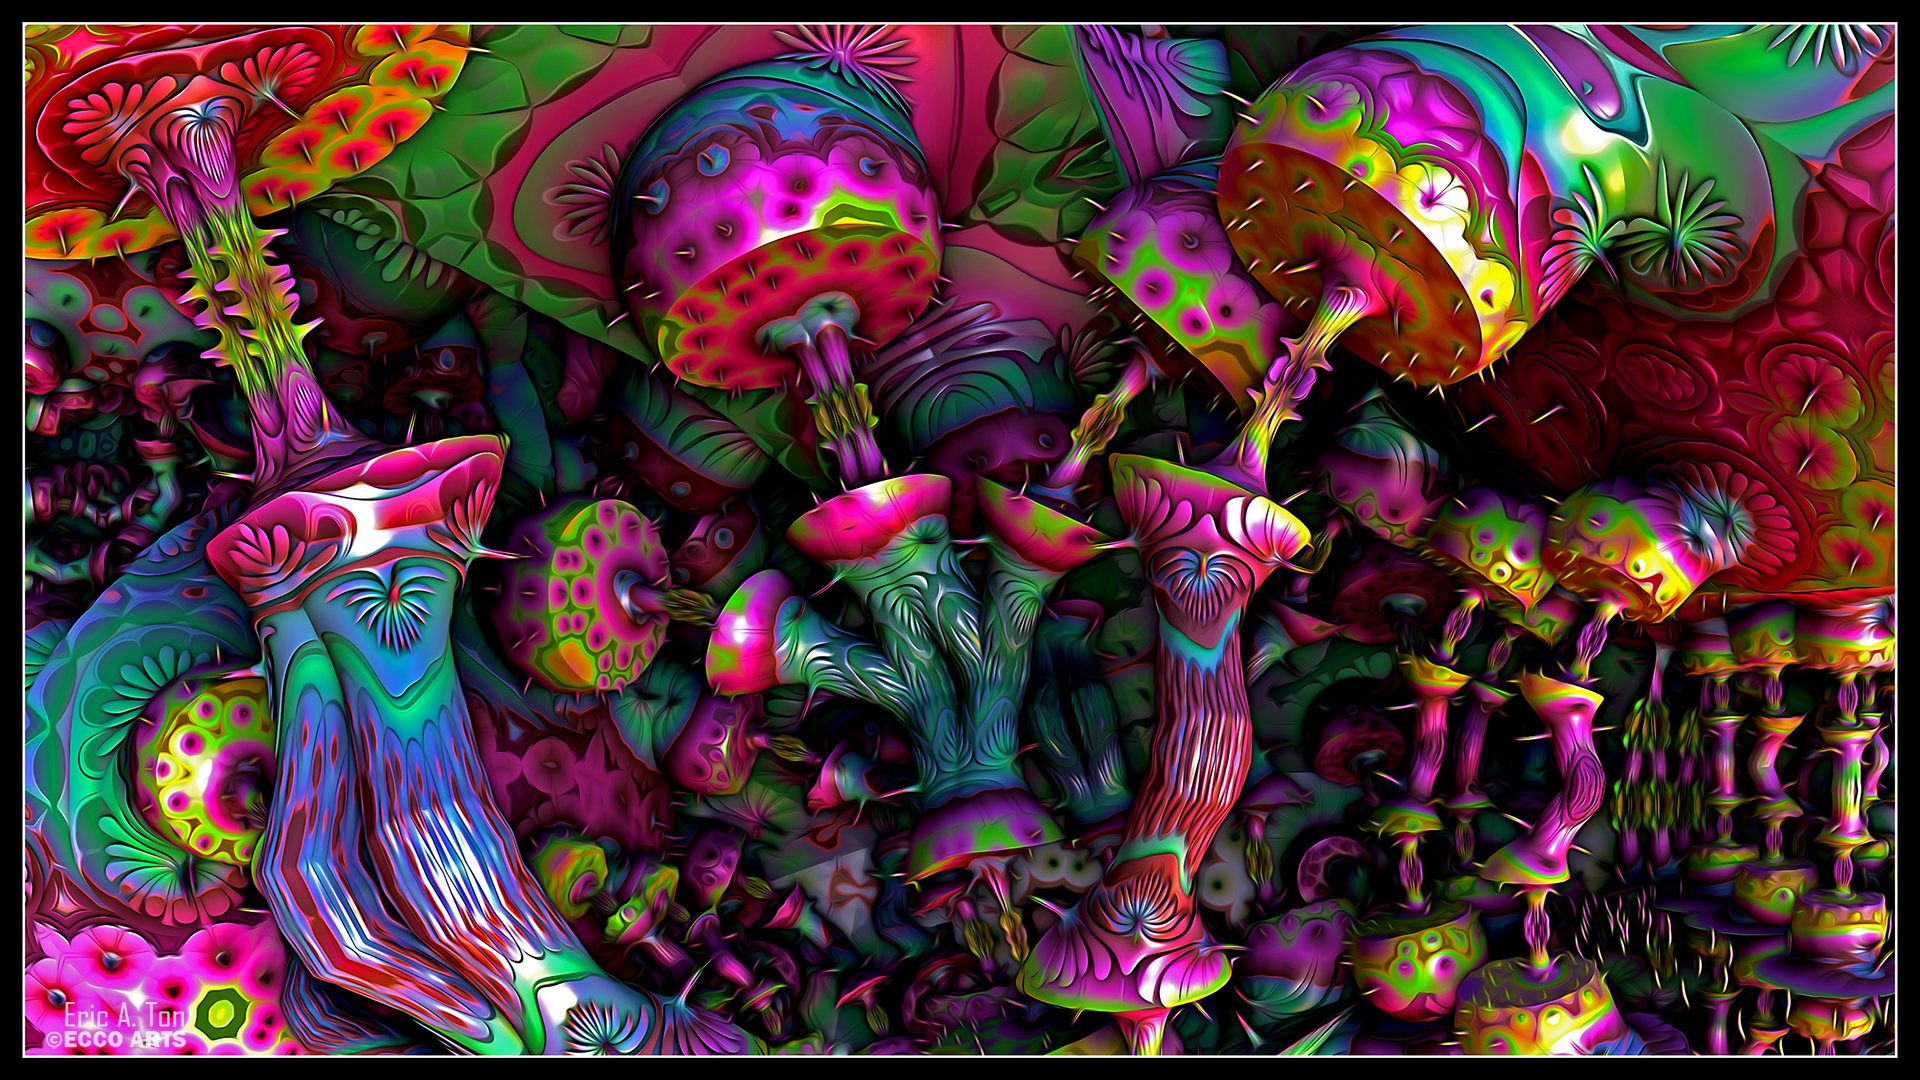 Psychedelic Mushrooms by eccoarts on